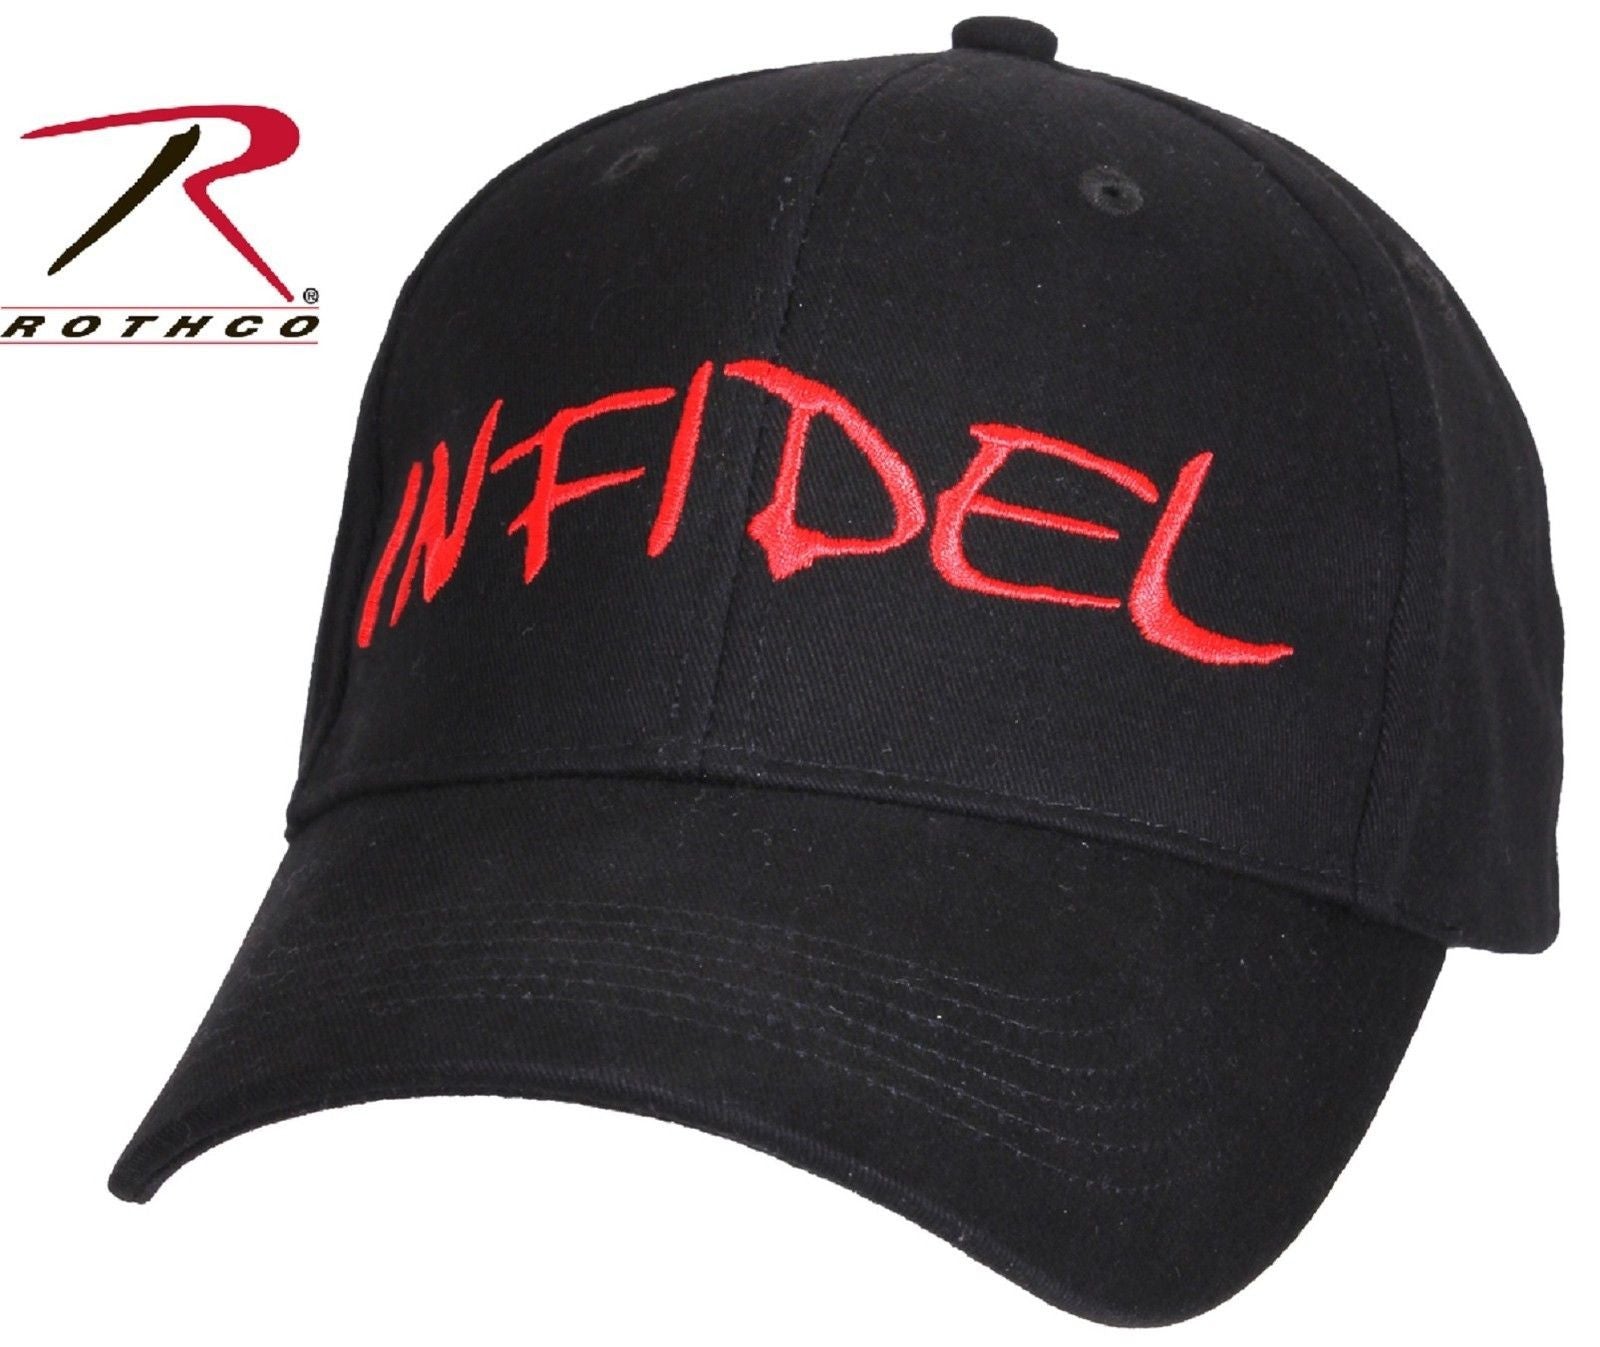 Mens Deluxe Low Profile INFIDEL Hat - Rothco Black & Red Adjustable Ba ...